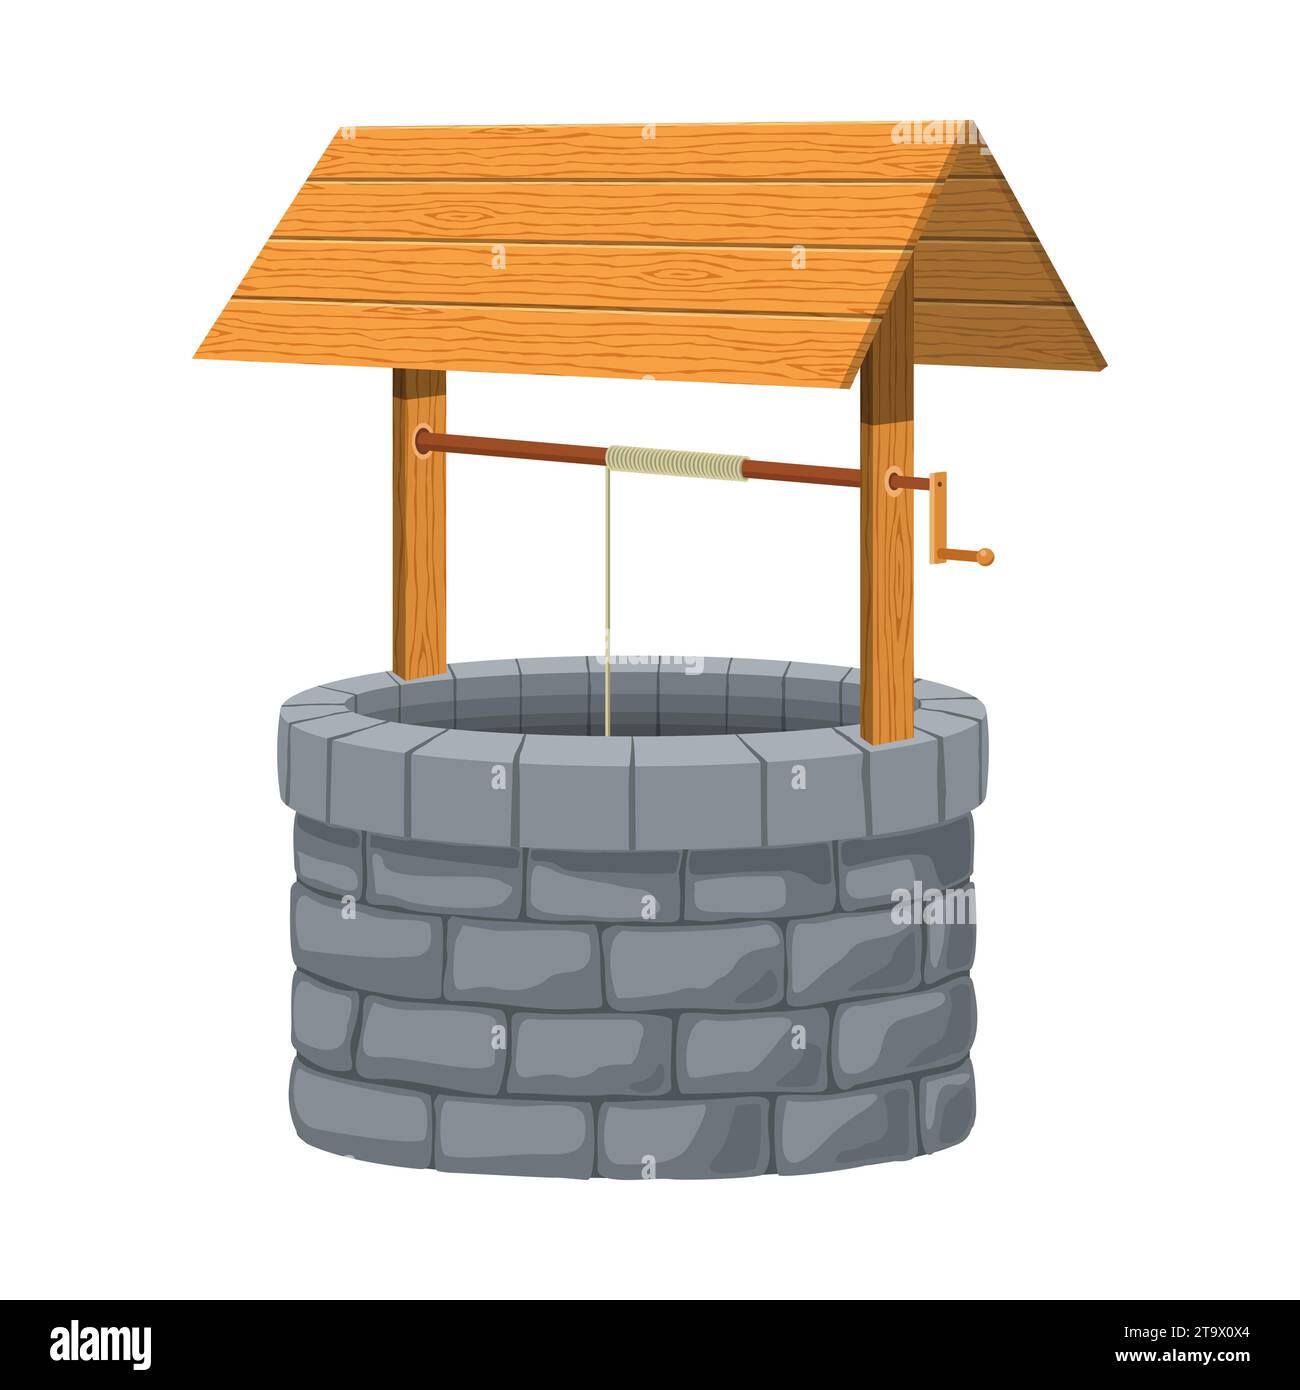 Old village stone water well with wooden roof isolated on white background. Rustic stone protective cover old traditional drinking water lift Stock Vector